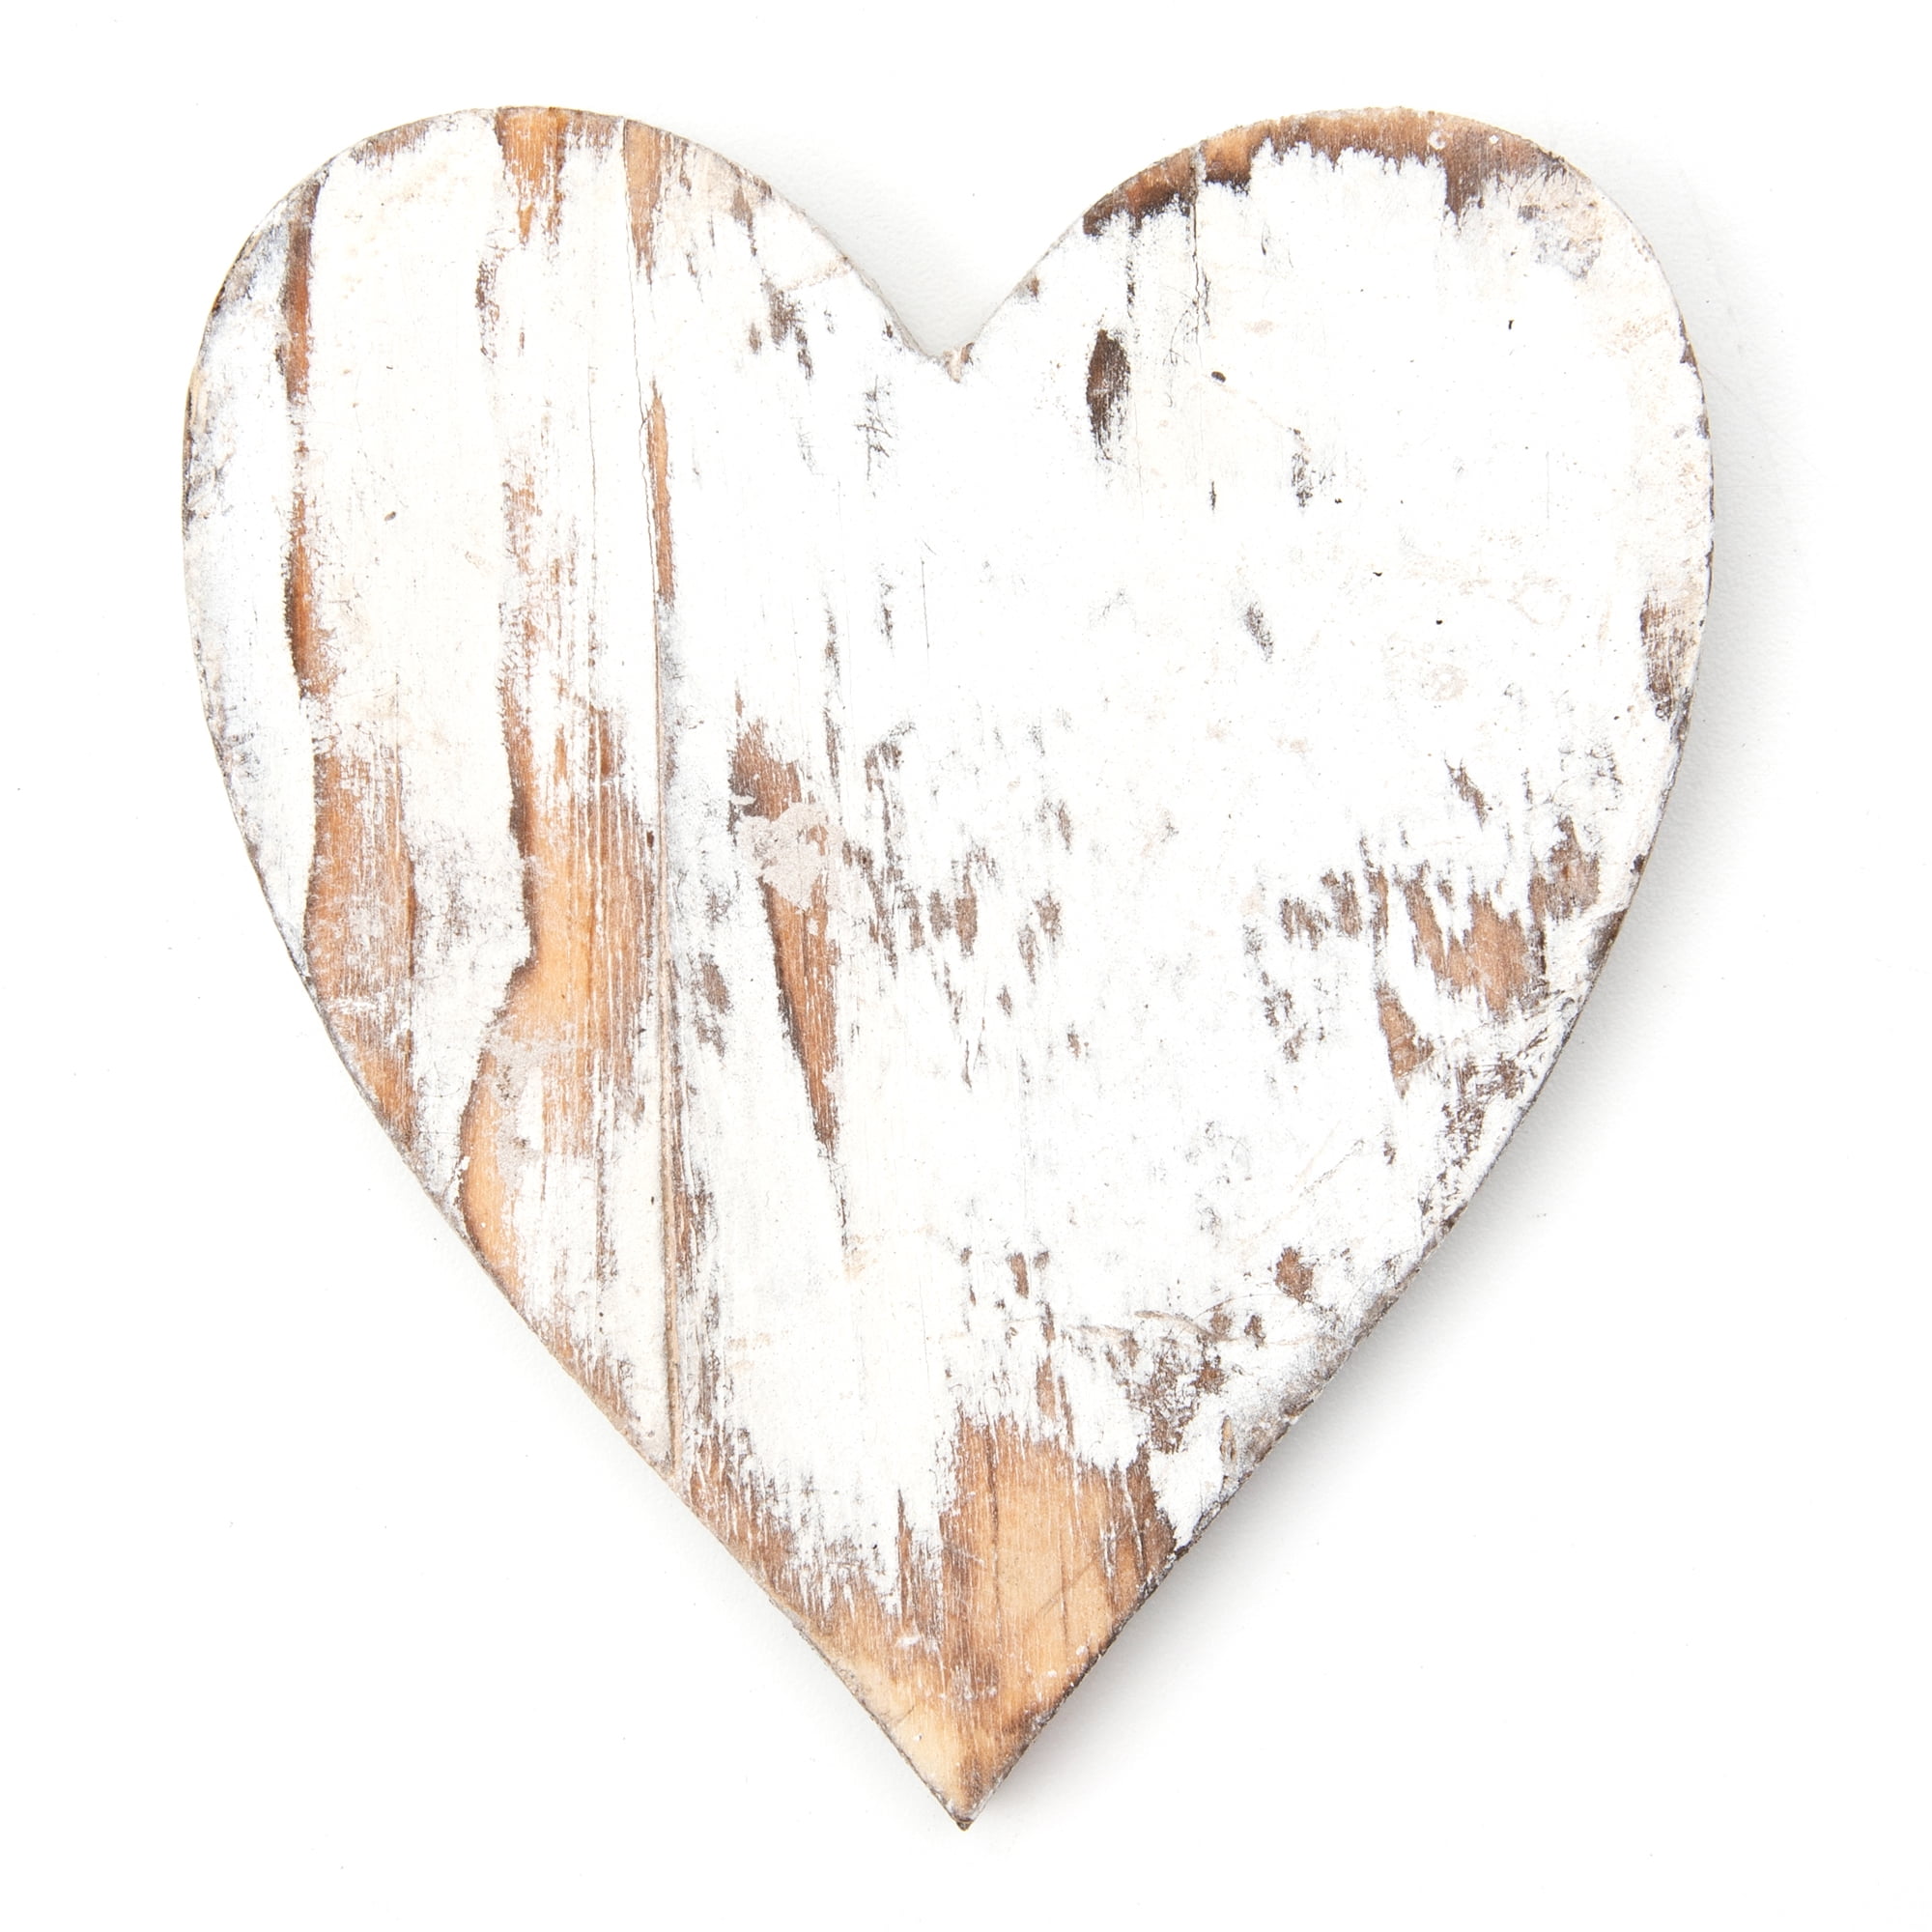 WHITE & GREY WOODEN HEART WEDDING DECORATION 'and they lived happily ever after' 